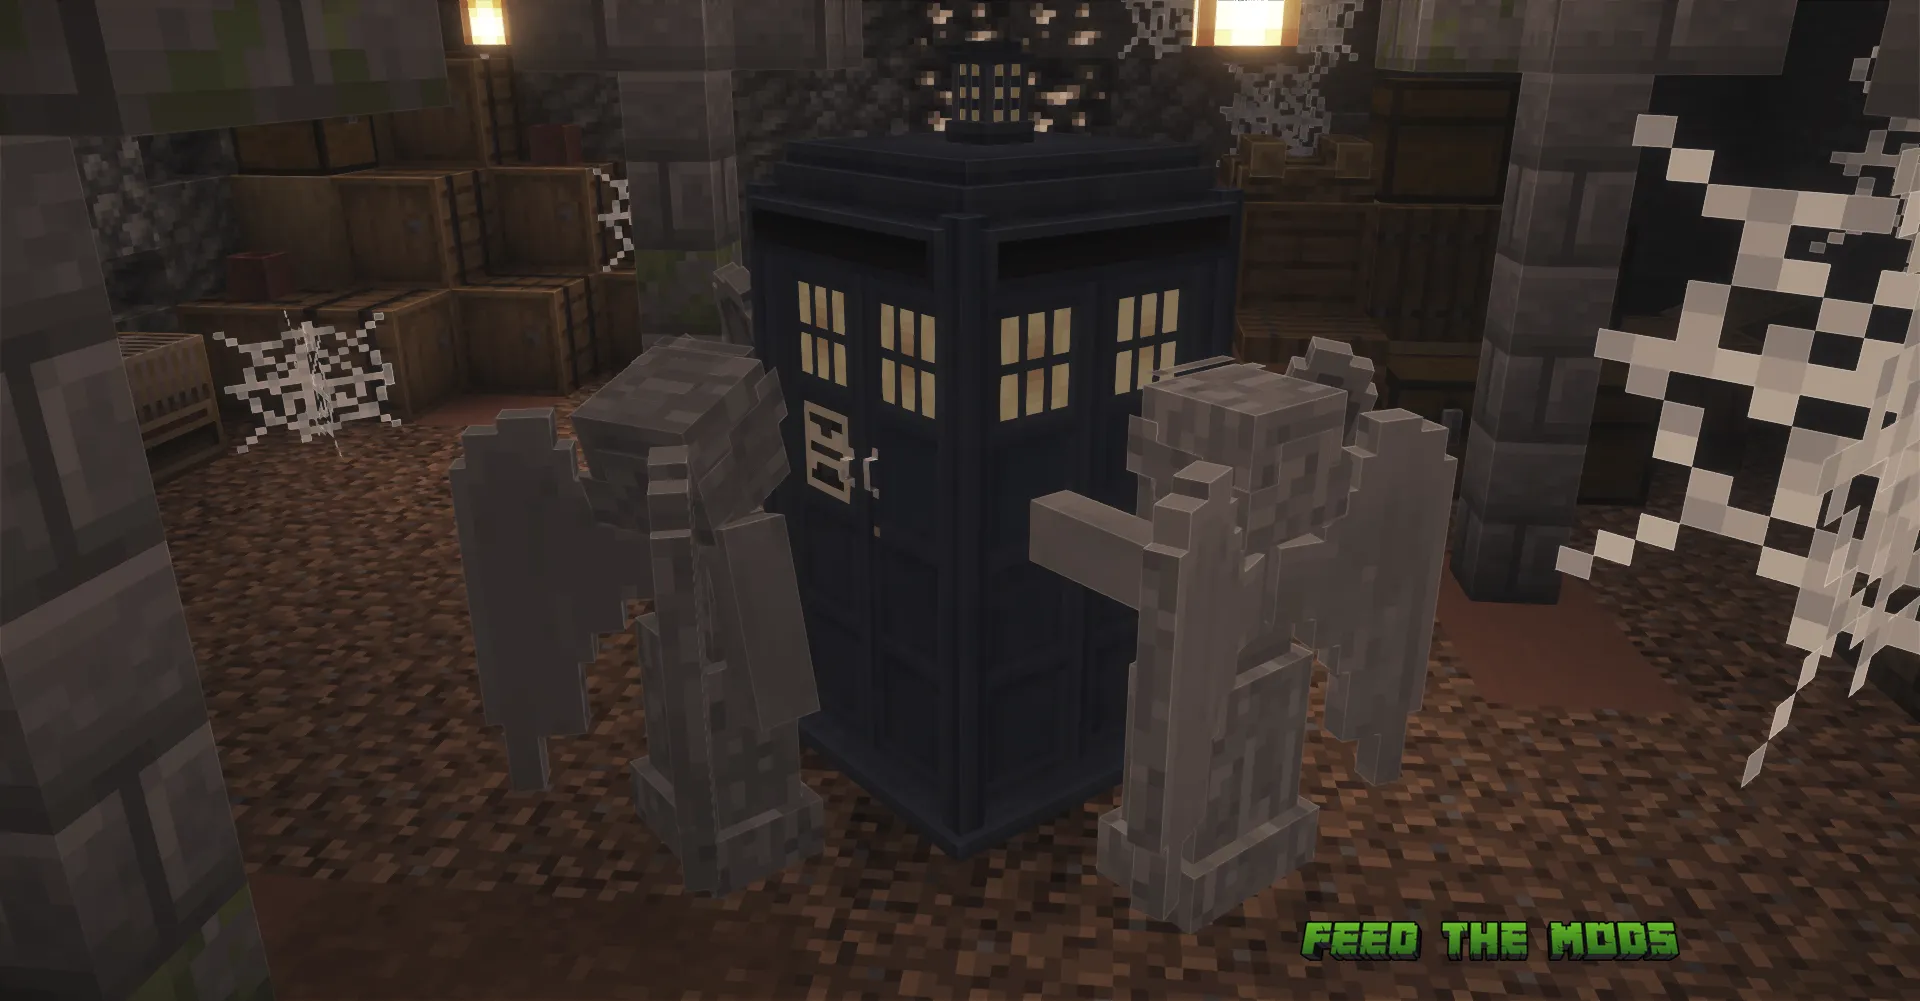 Doctor-Who-Weeping-Angels-Mod-13